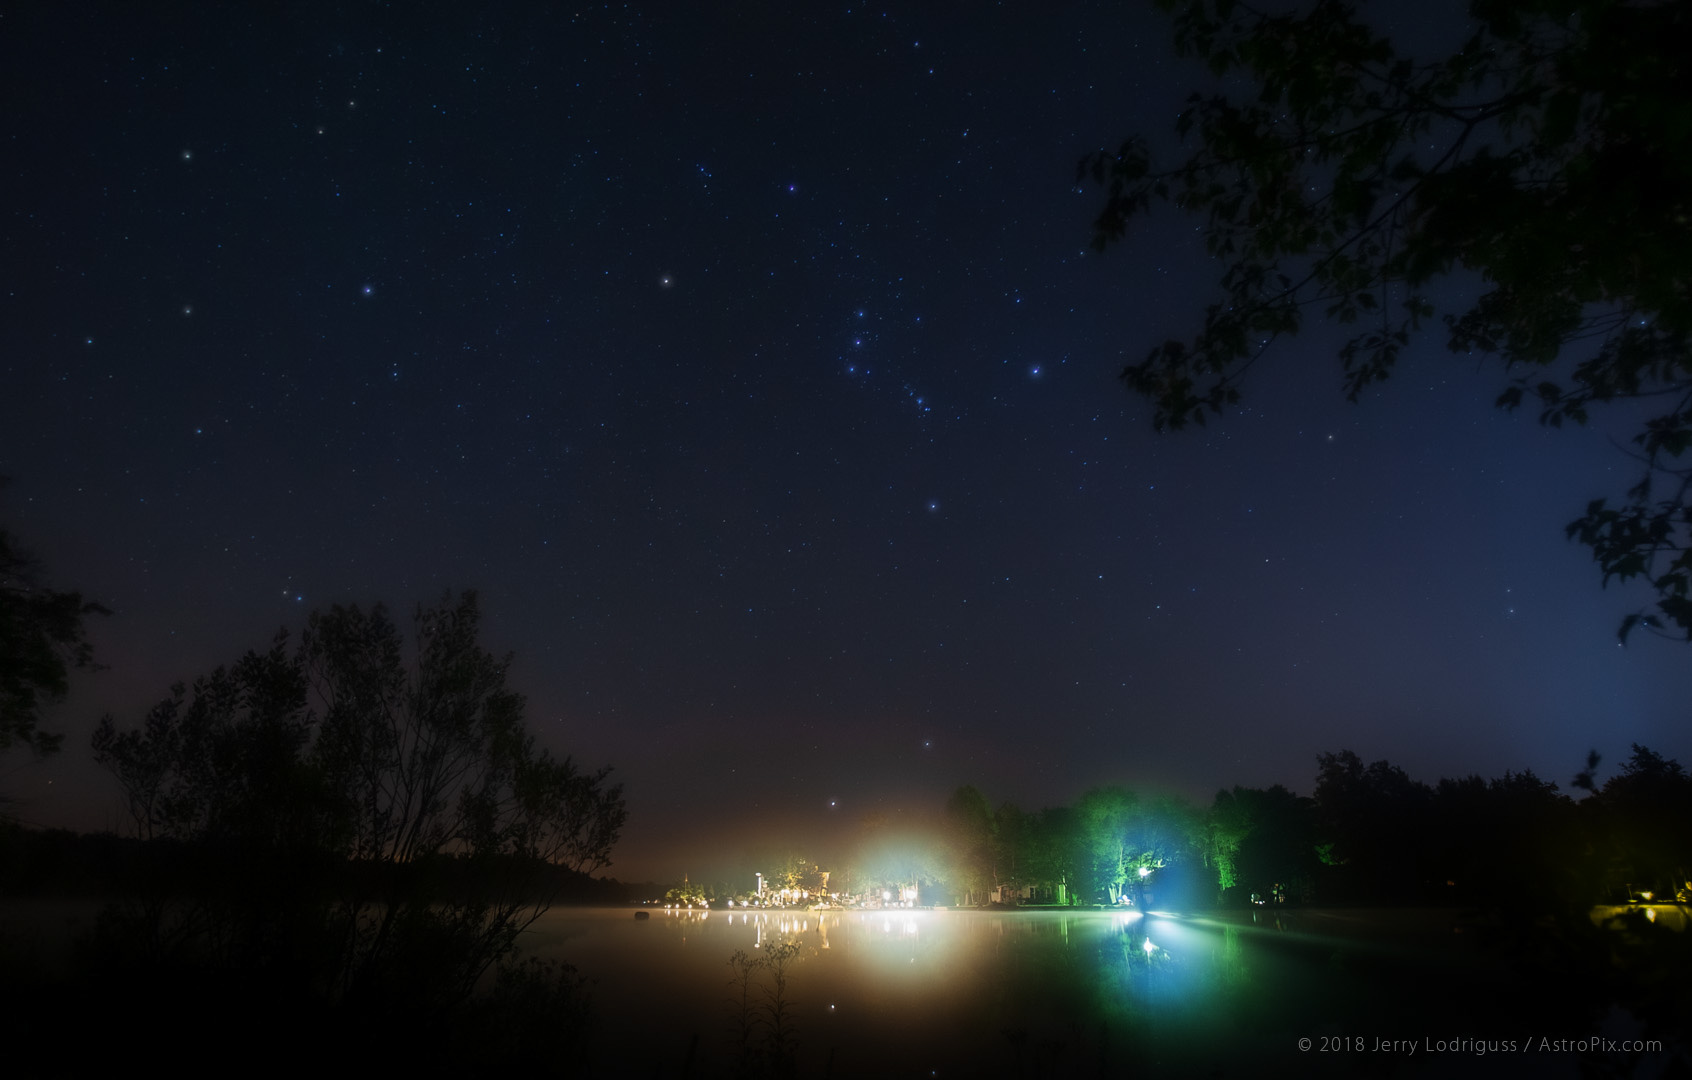 The constellation of Orion rises over fog on the Mullica River in the Pine Barrens of New Jersey.